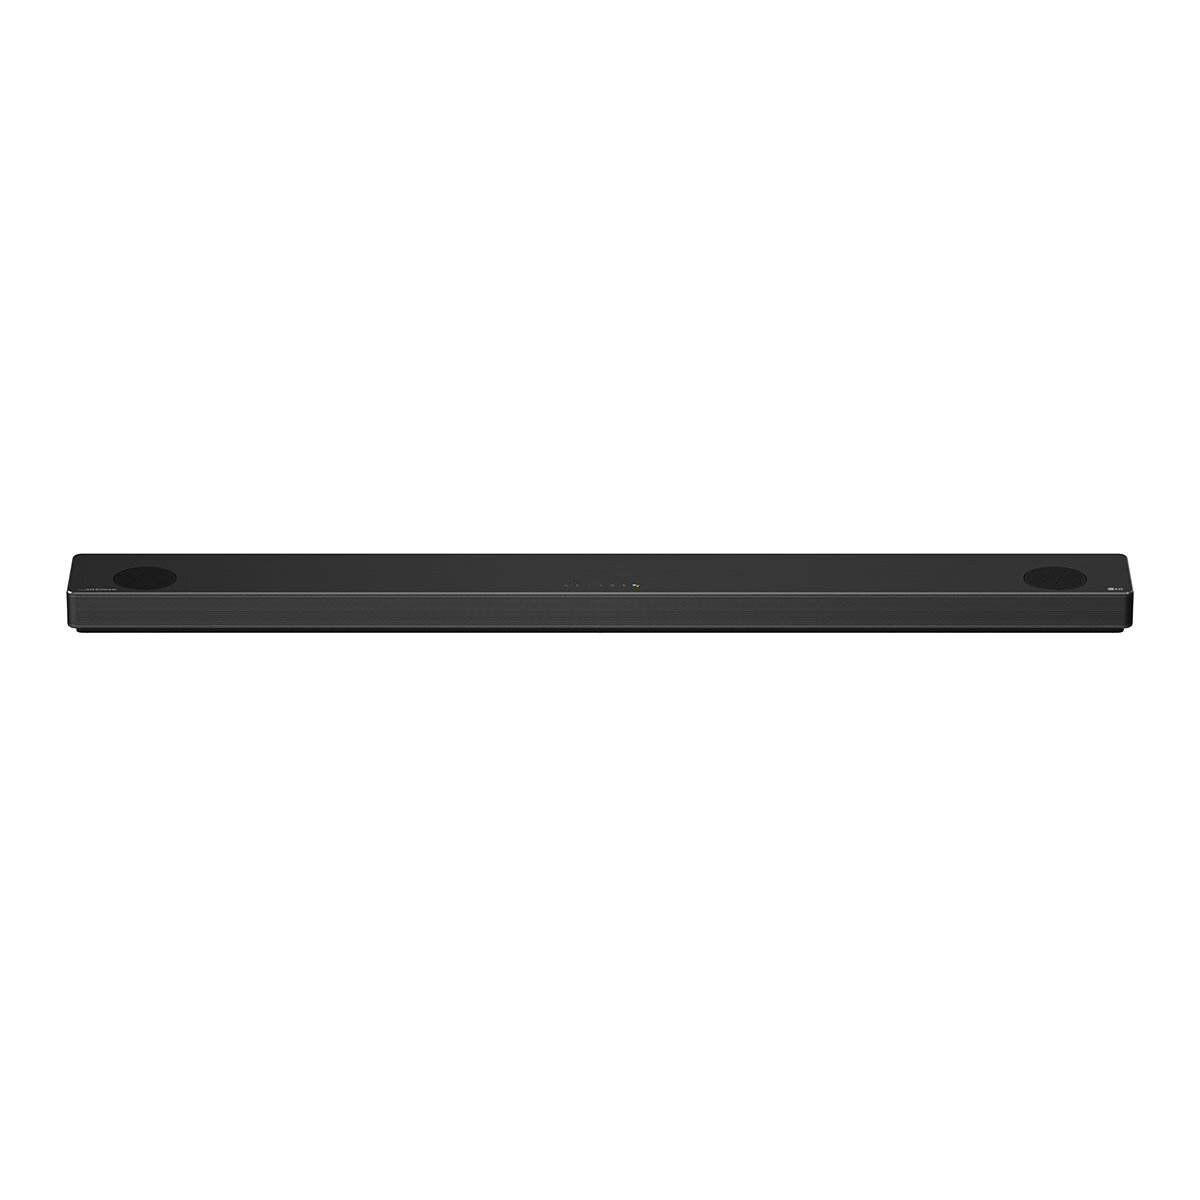 Buy LG SN11RG 7.1.4CH Wireless Soundbar with Subwoofer at costco.co.uk